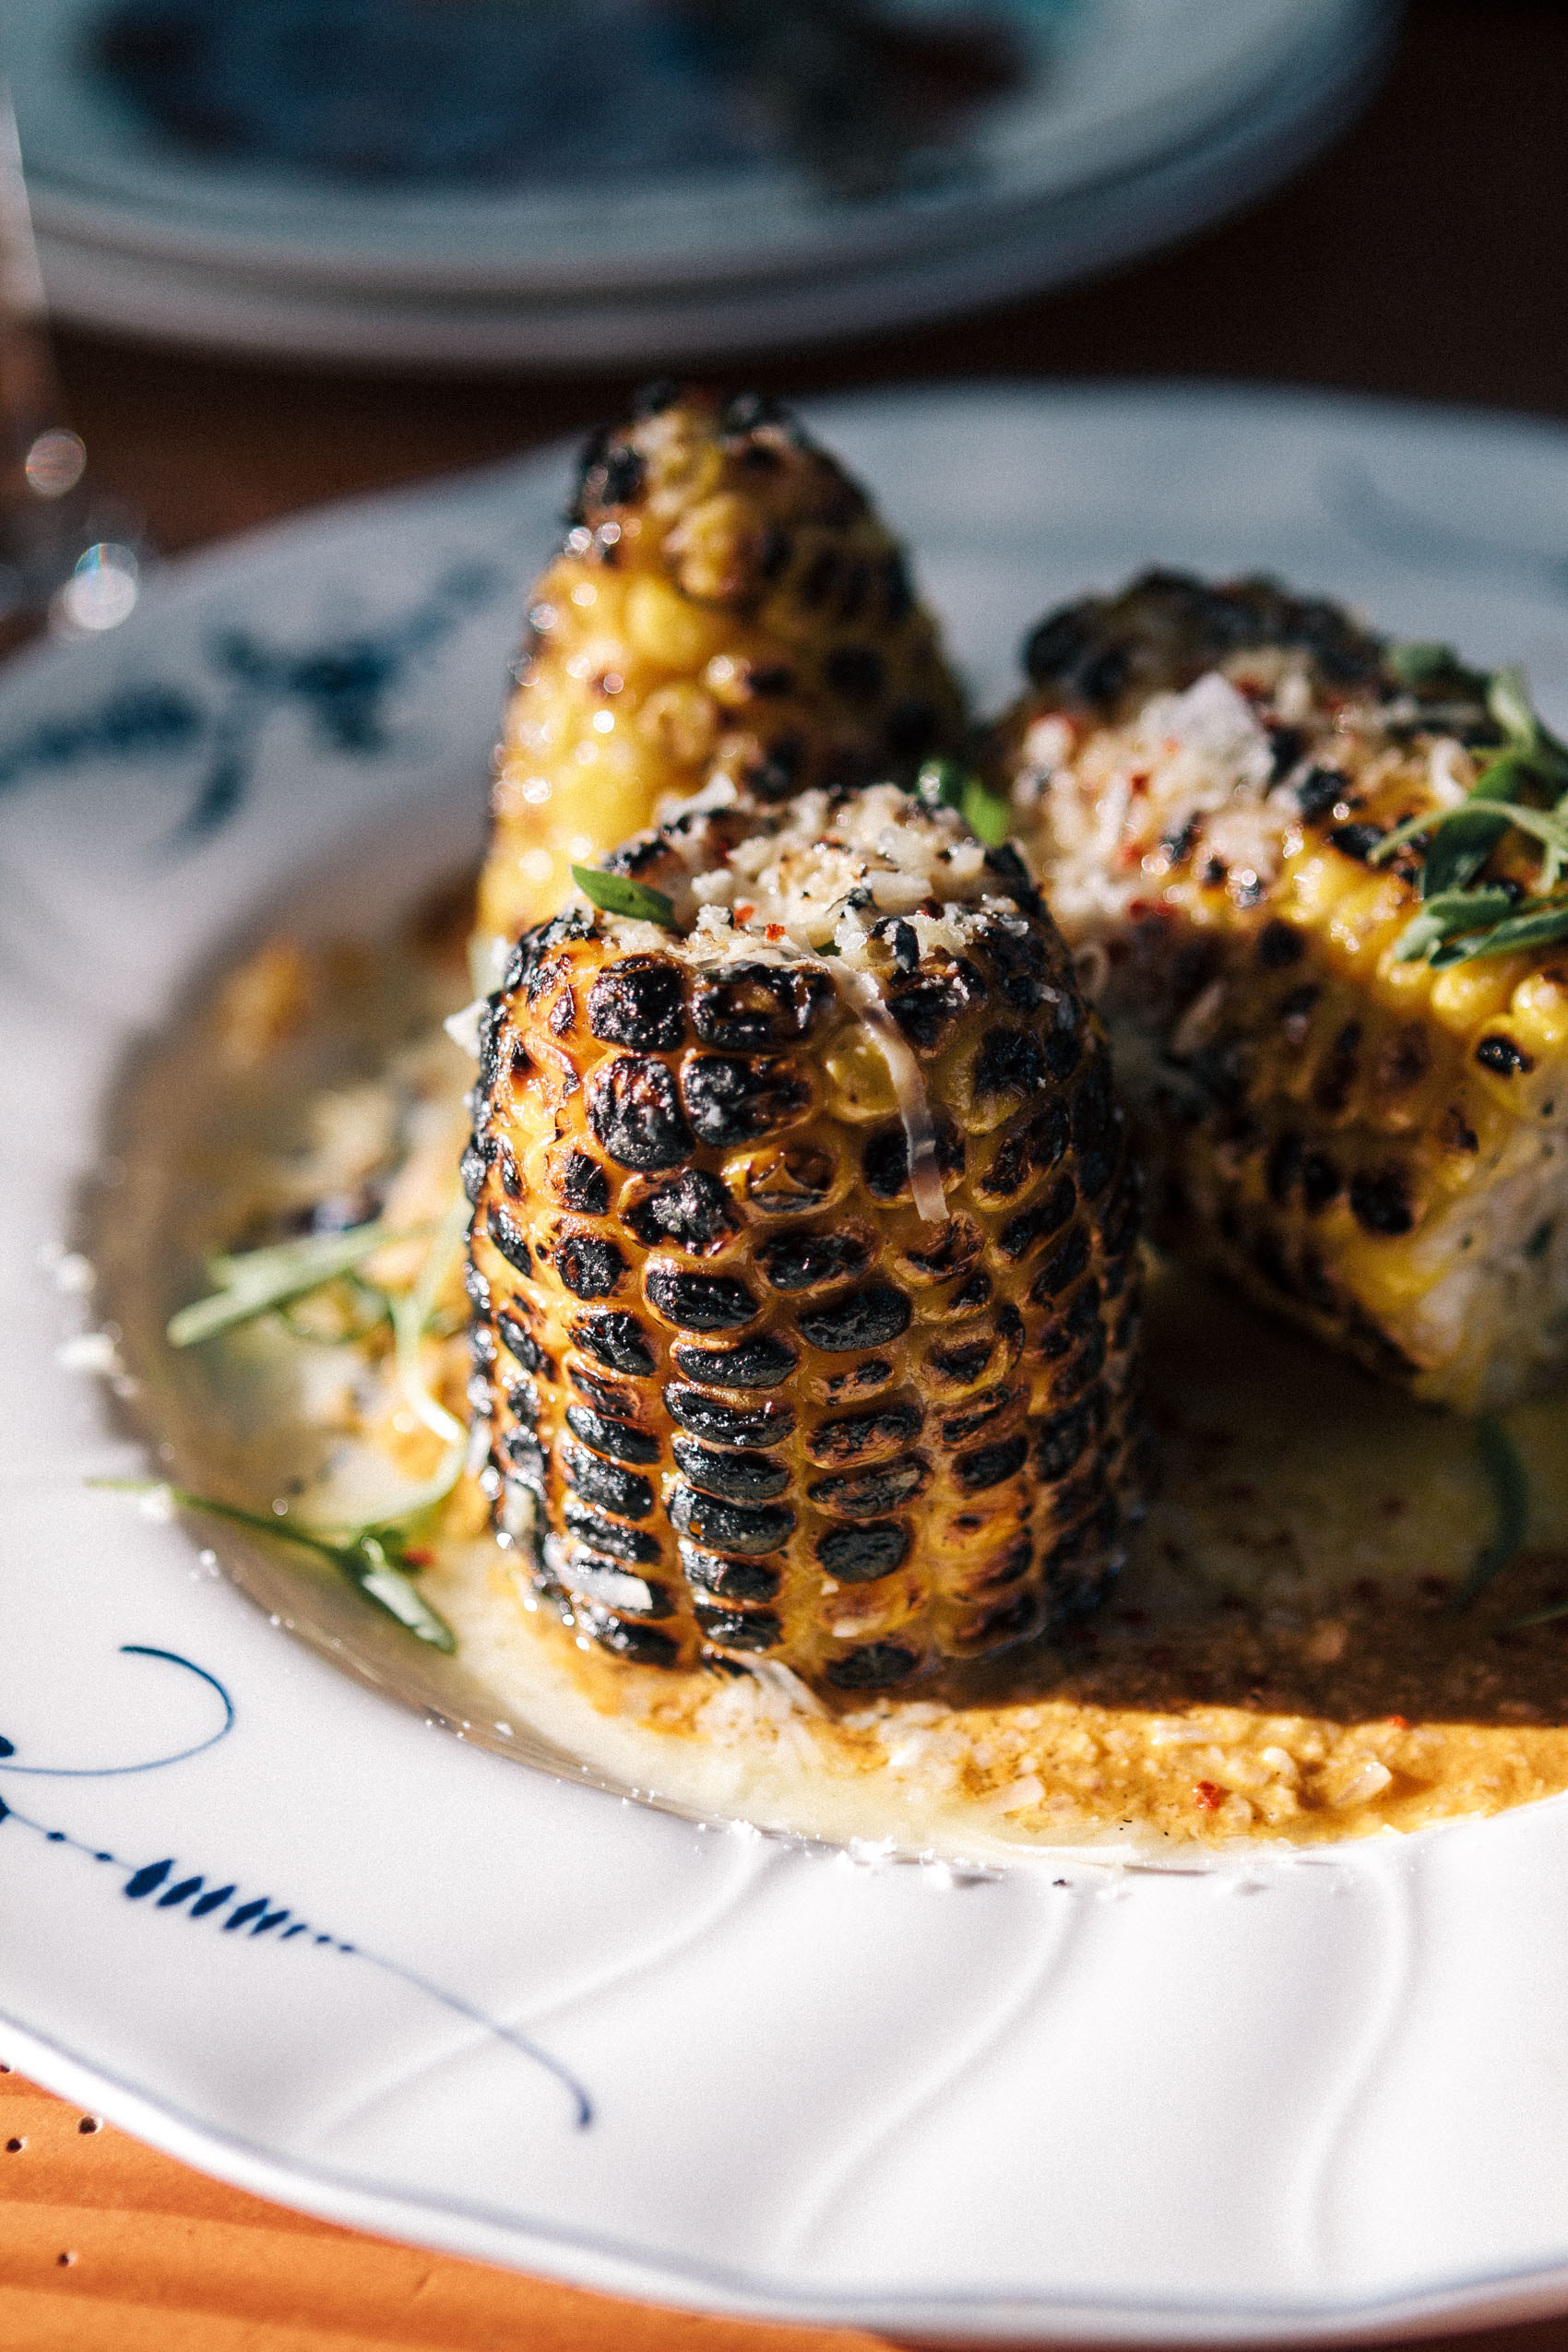 Grilled corn or elote at Commissary in The Line Hotel Los Angeles